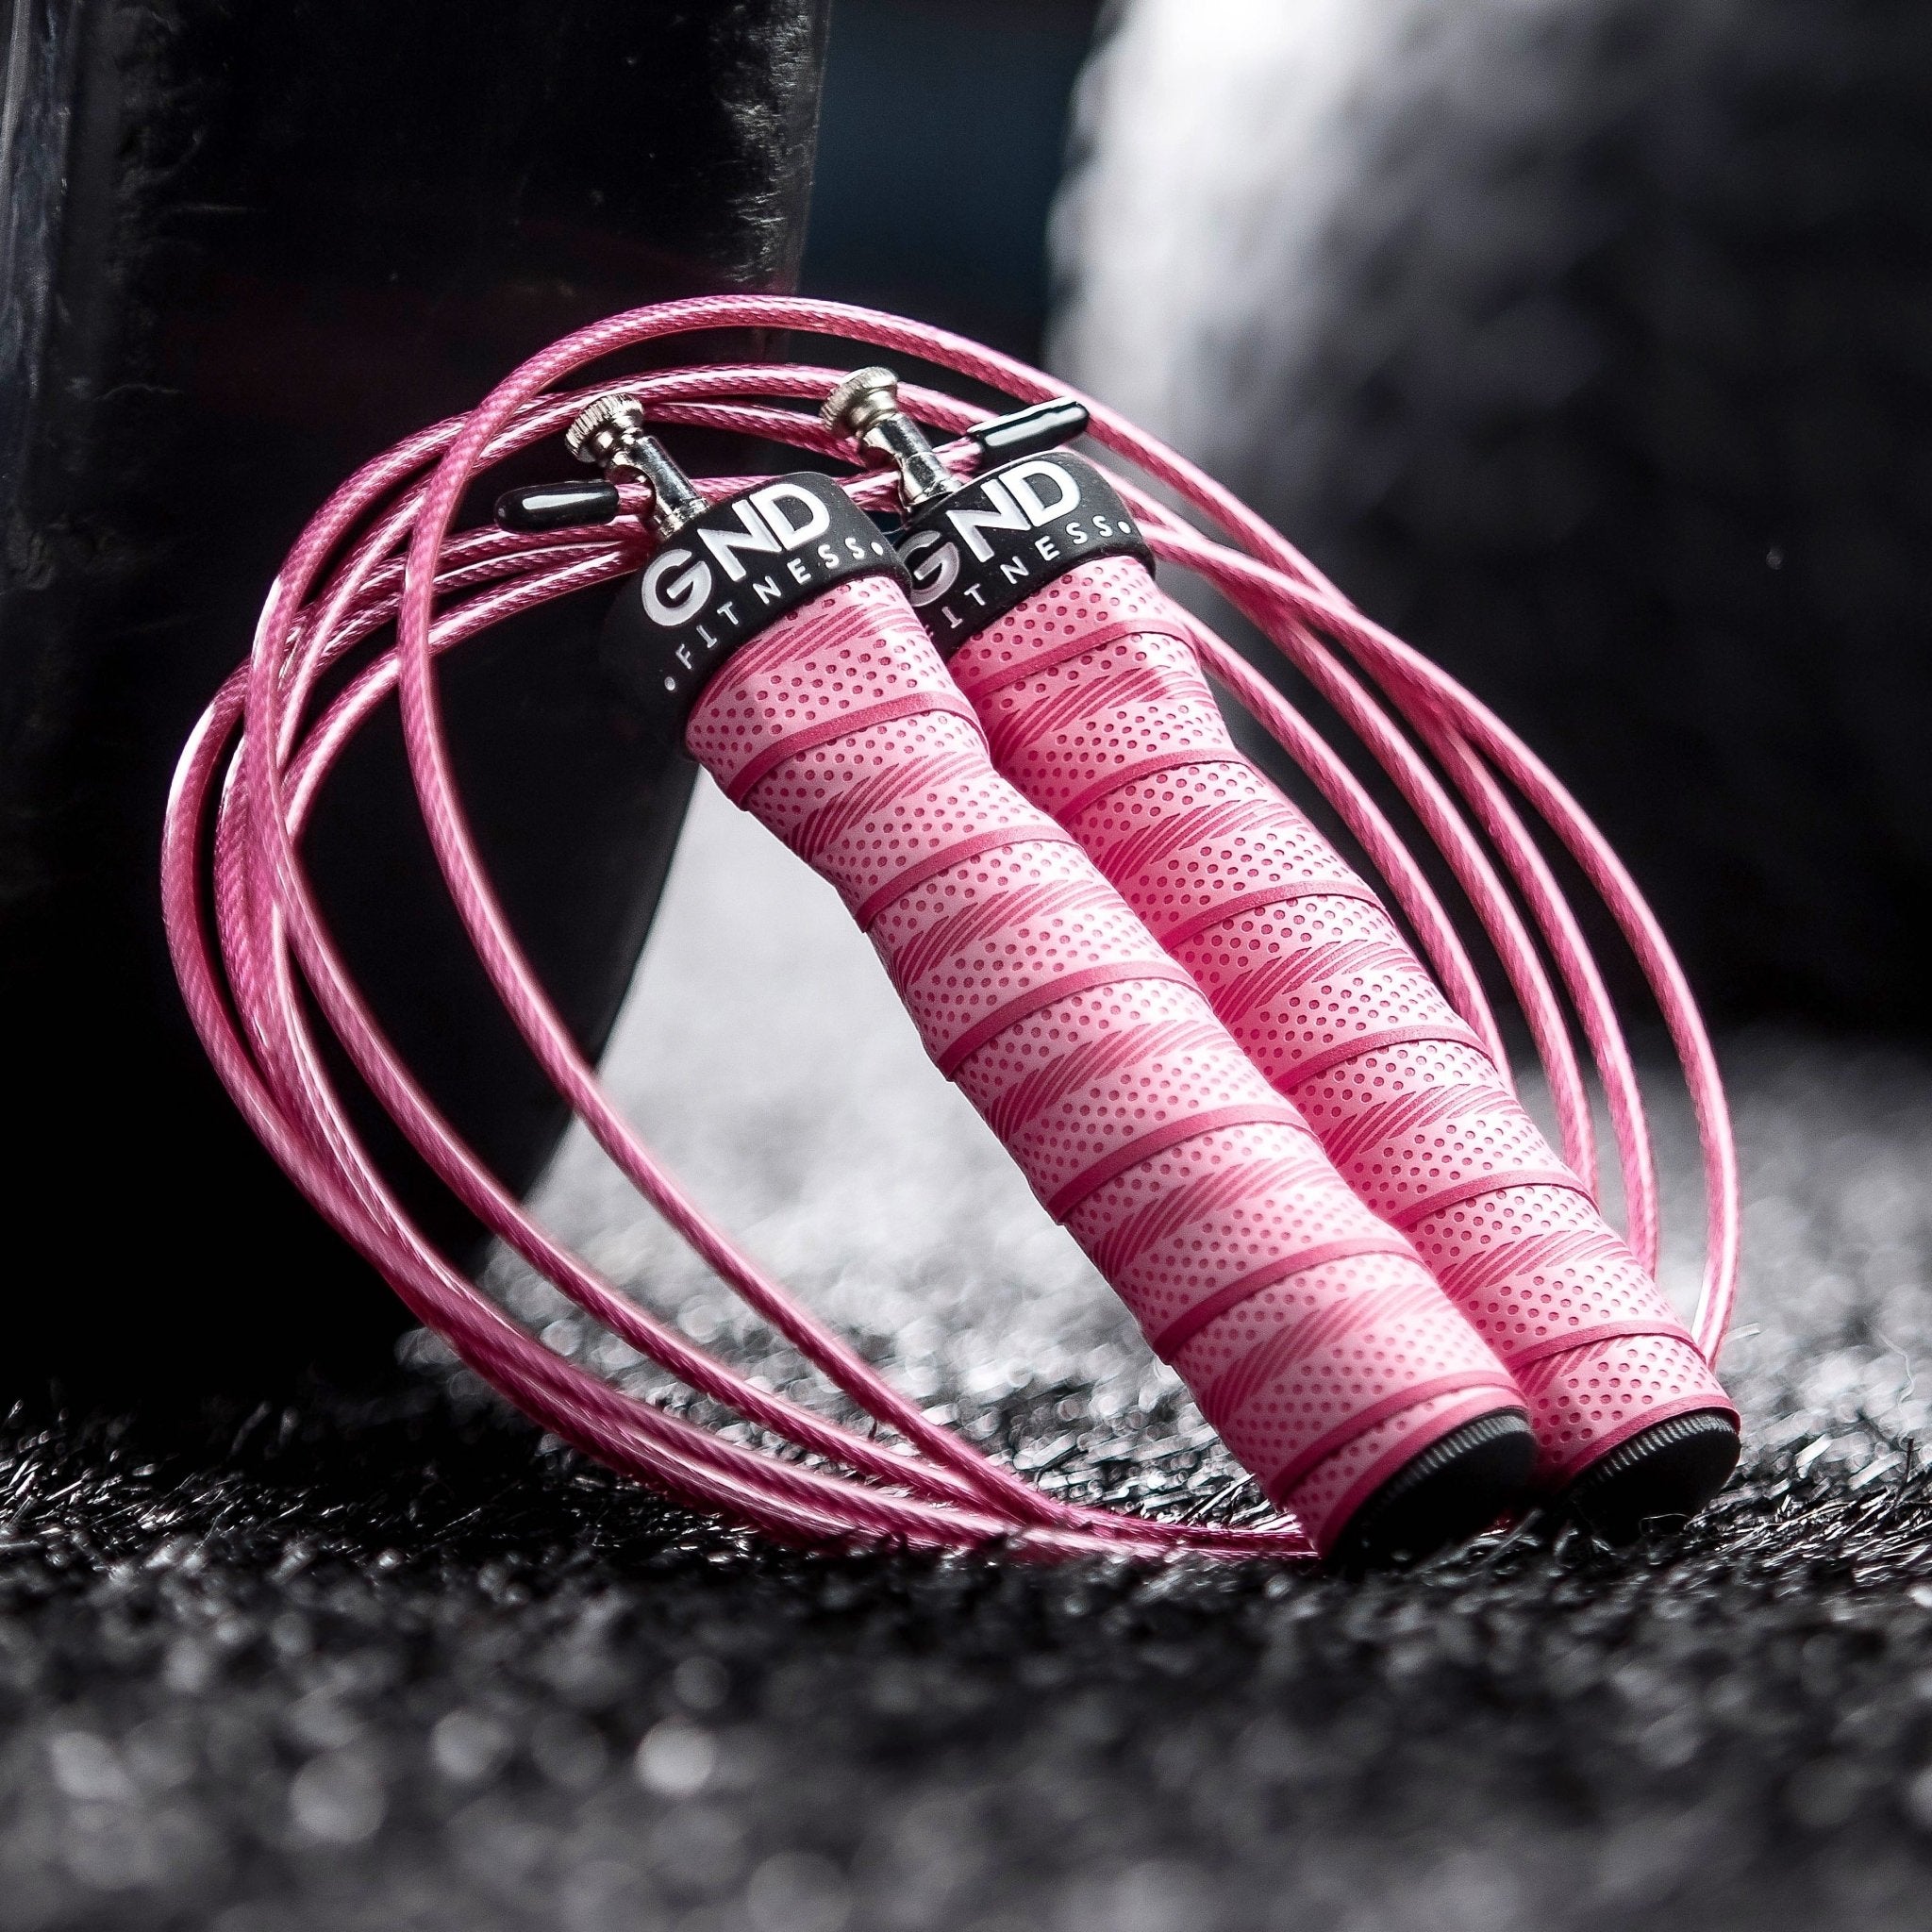 GND SR Speed Skipping Rope // Single Ball Bearing // Pretty Pink - SR Skipping Rope- GND Fitness